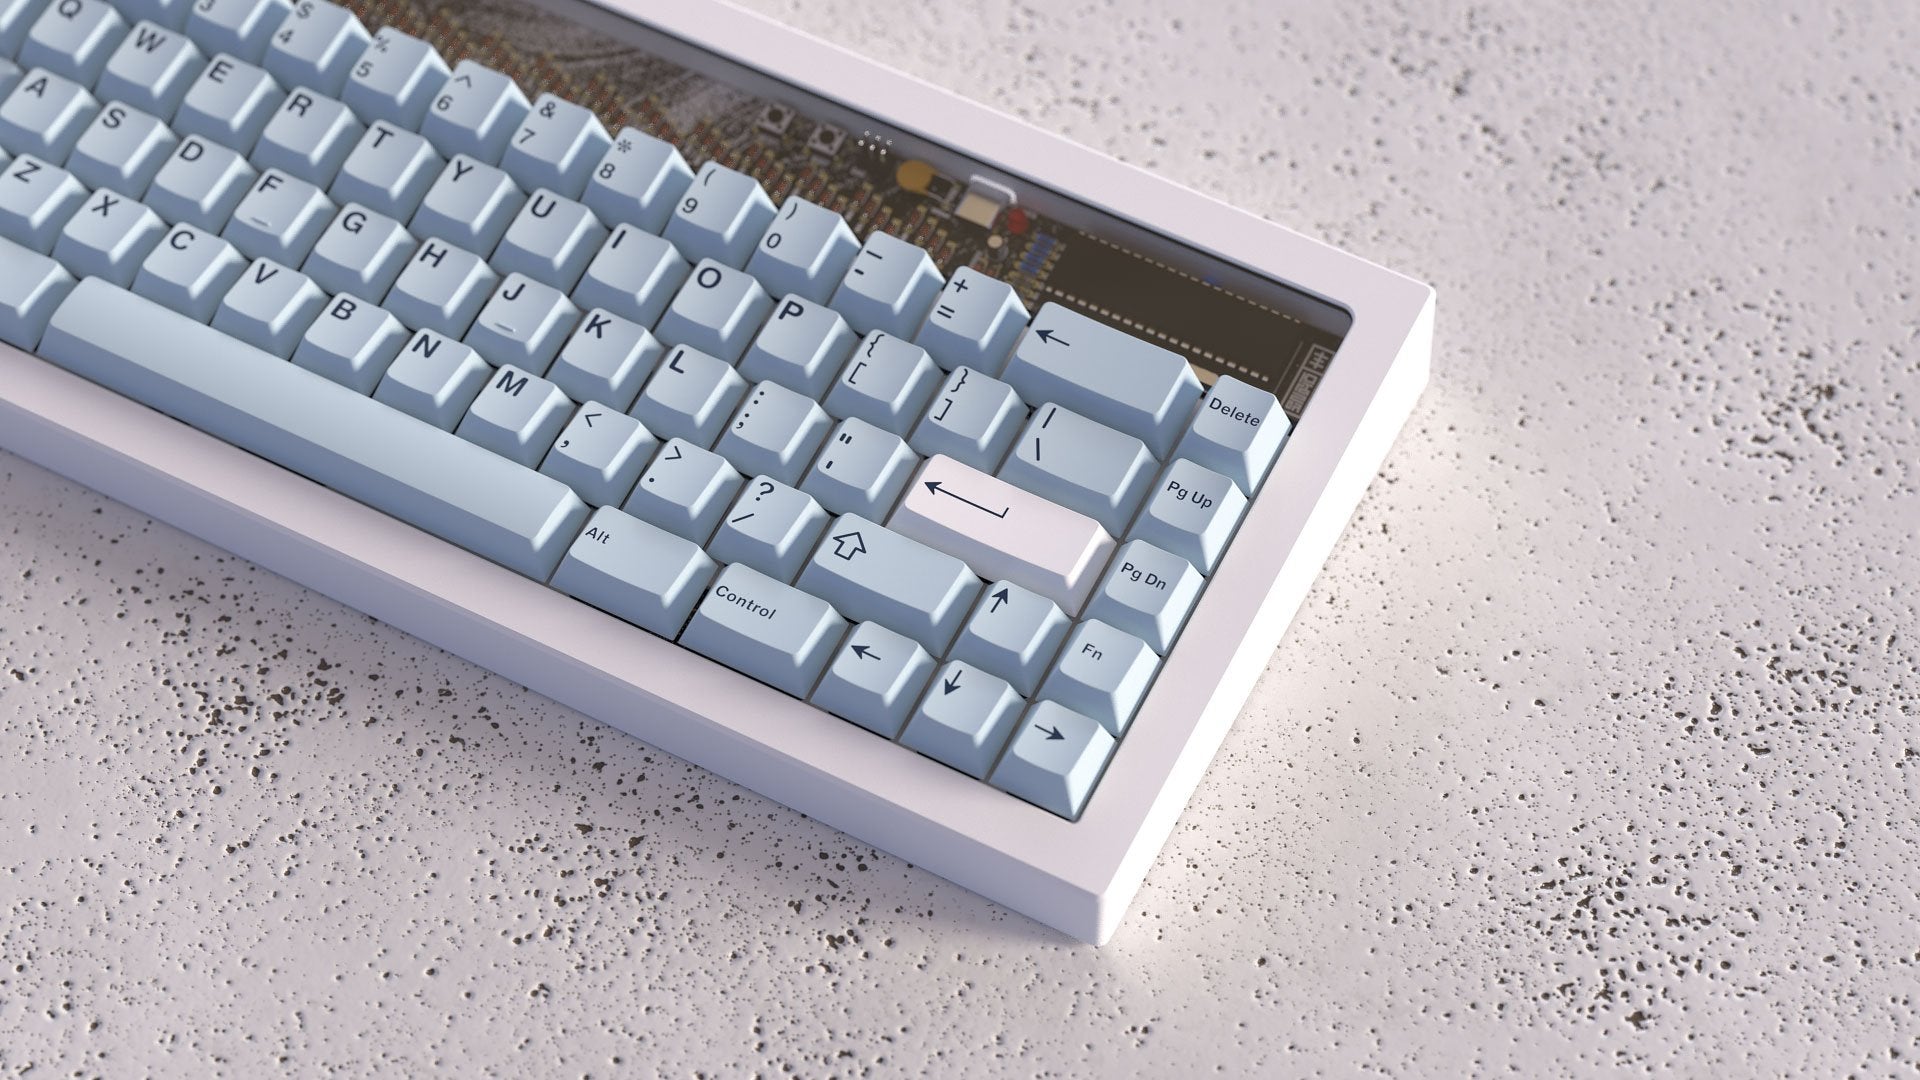 PBT FROST